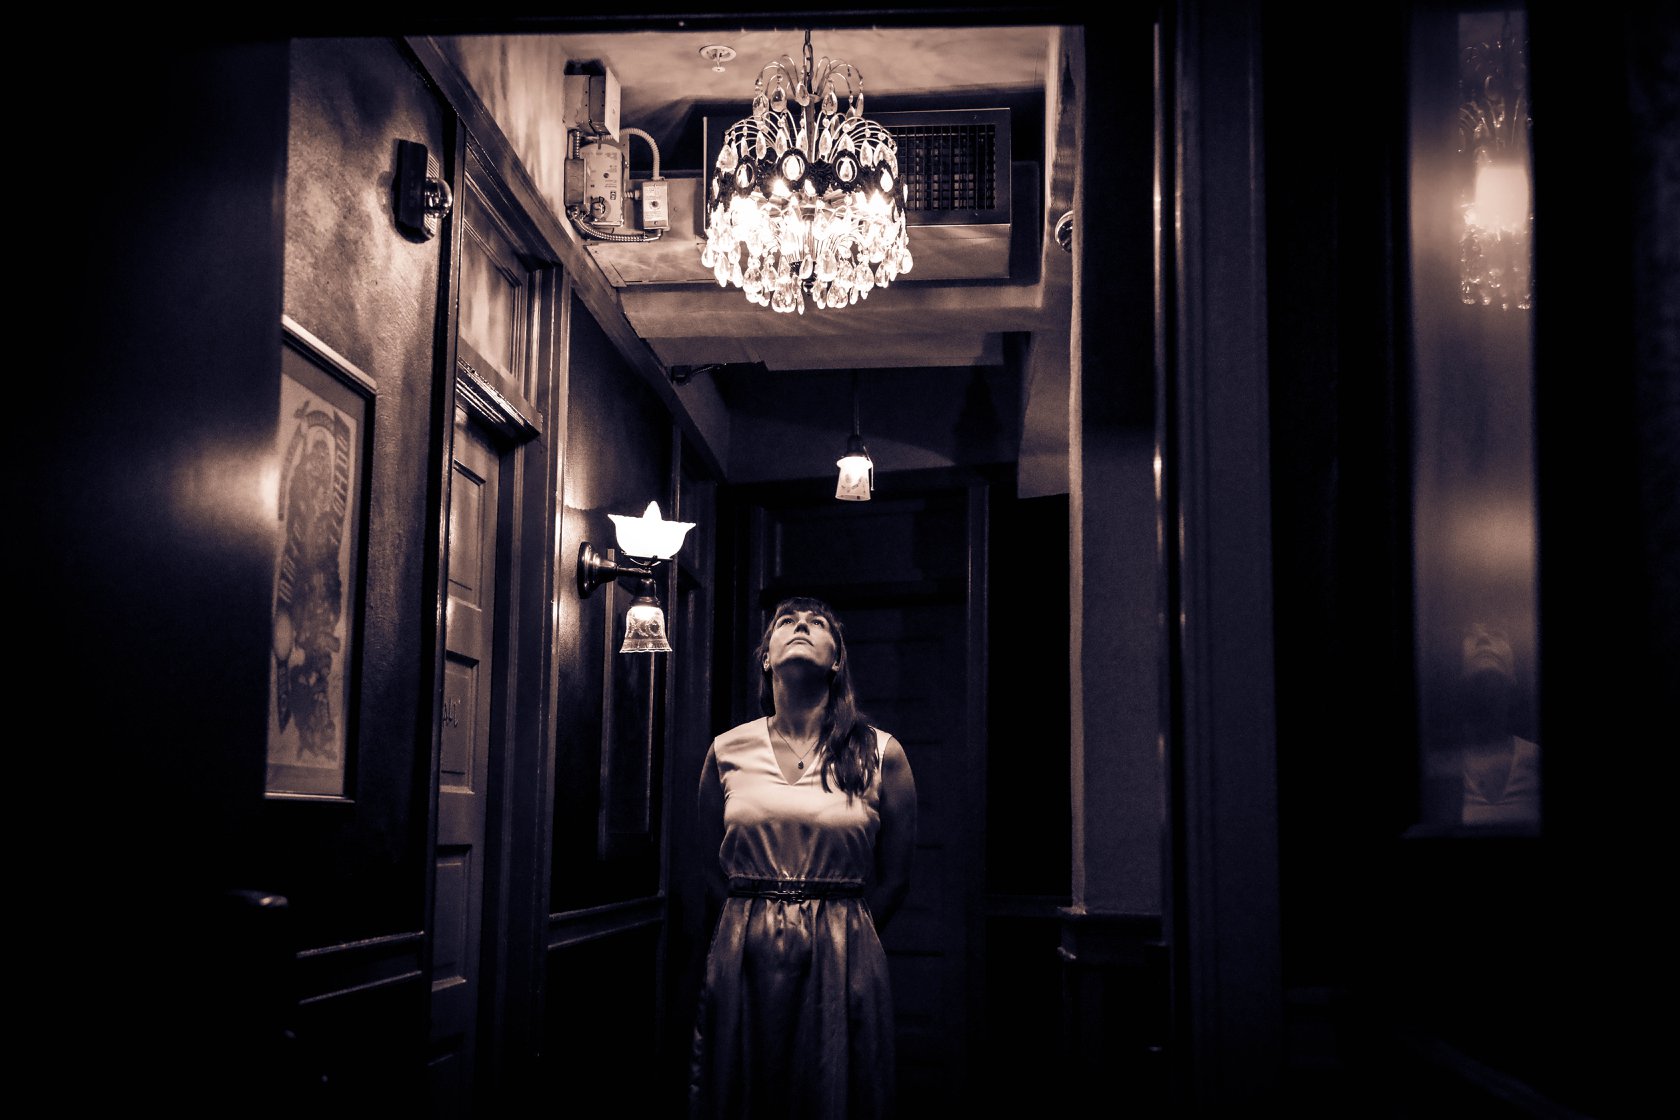 A sepia toned photo of Stephanie Strange looking up towards
               an oranate chandelier in a thin hallway with antique lamp
               fixtures and framed photos